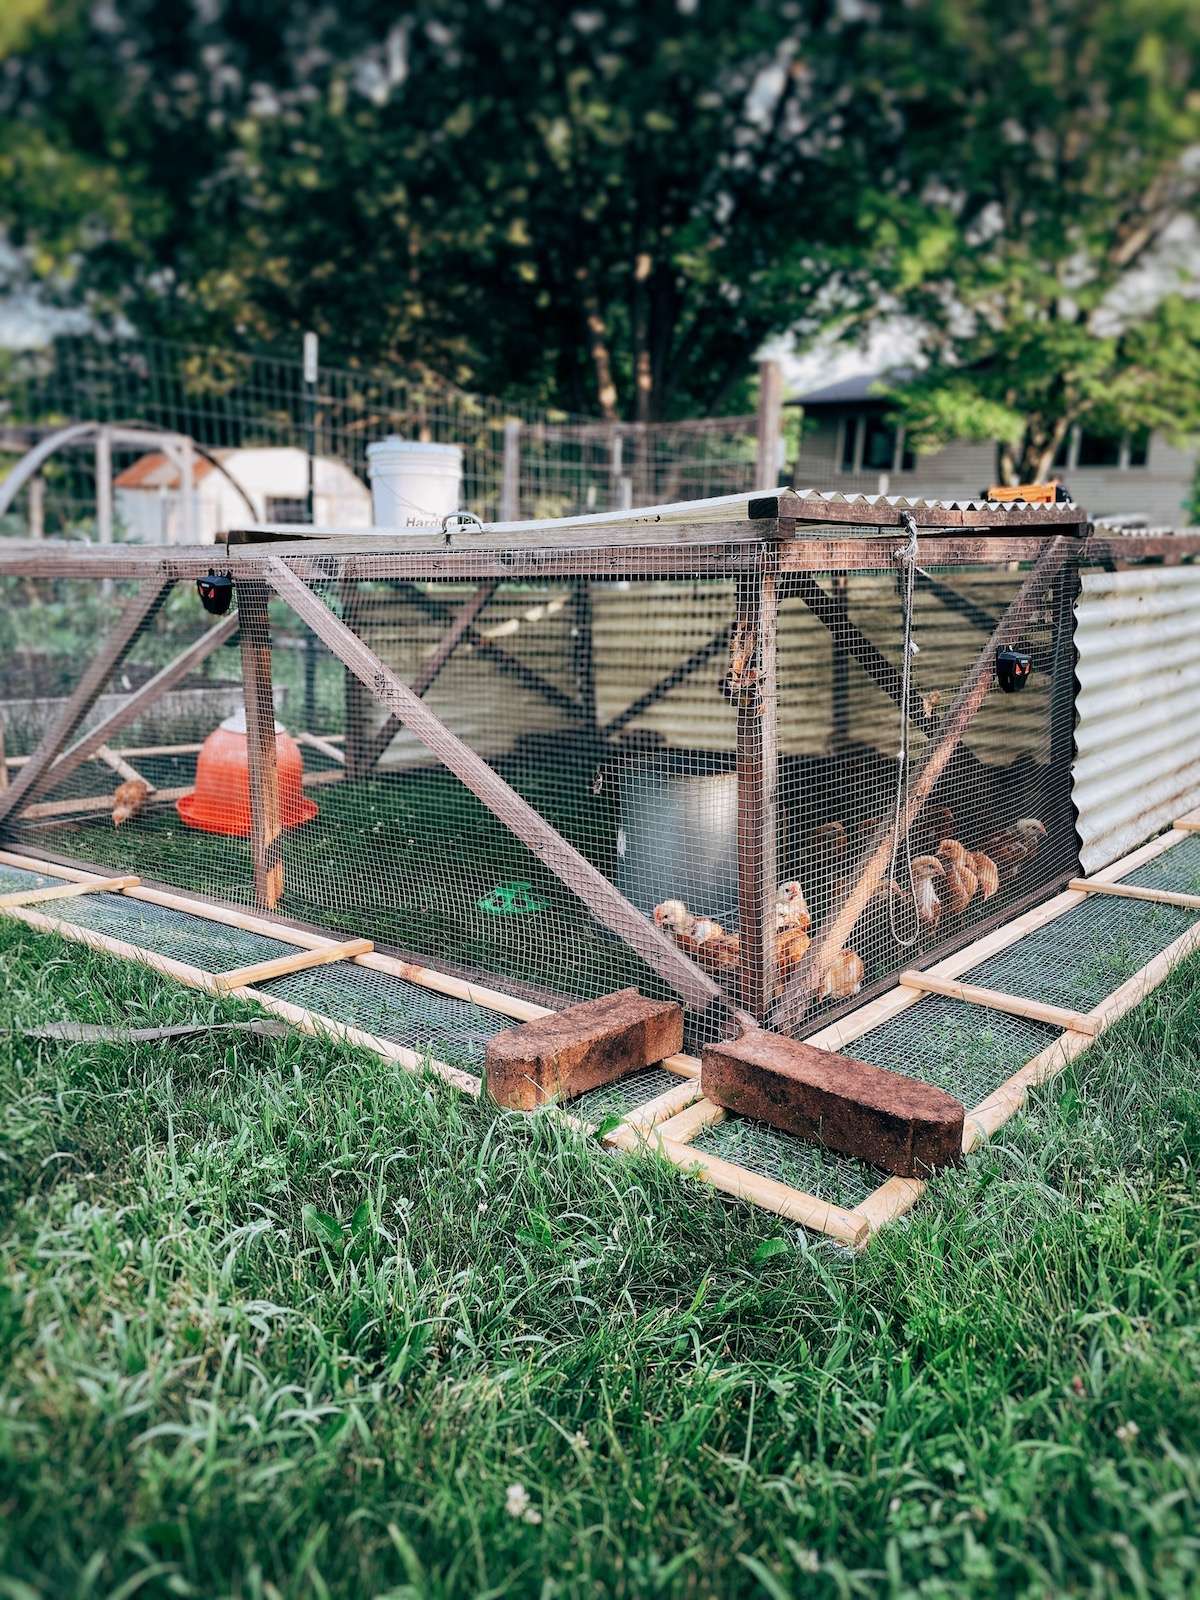 A salatin-style chicken tractor set up with removable no-dig skirts that are weighed down with bricks